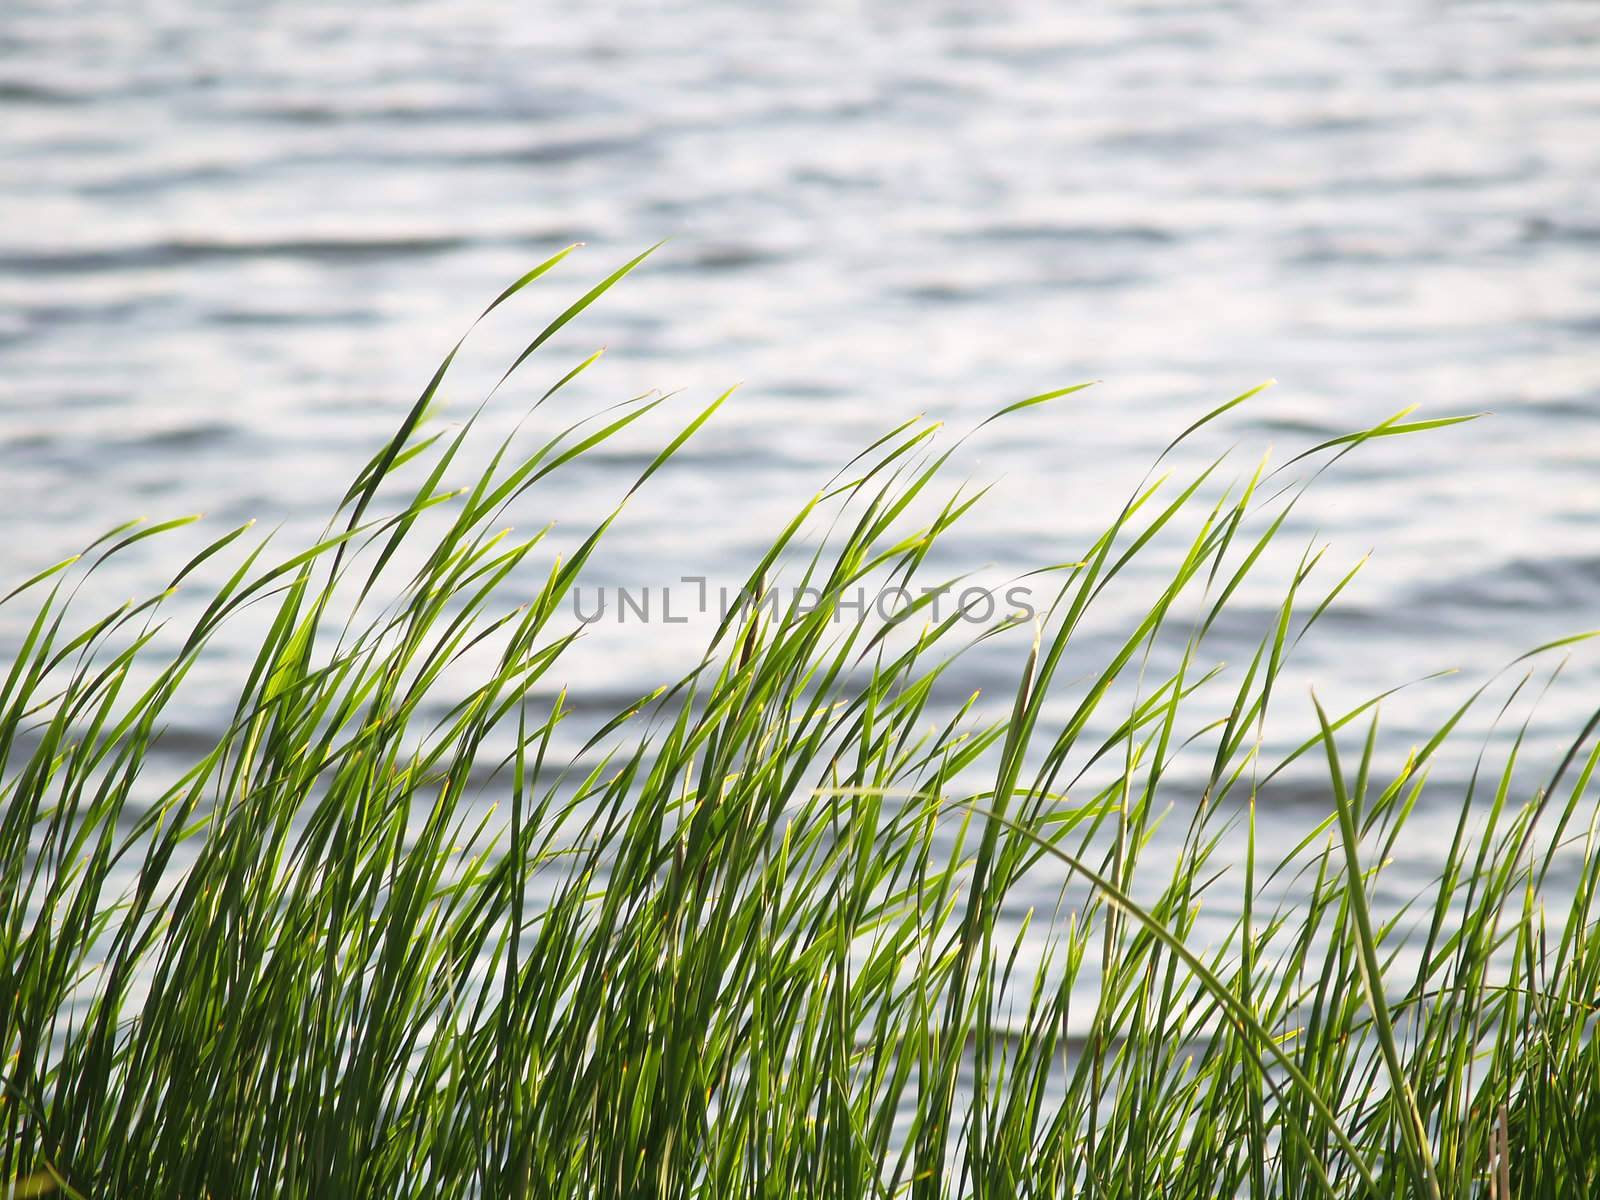 Closeup view of grass along the water's edge